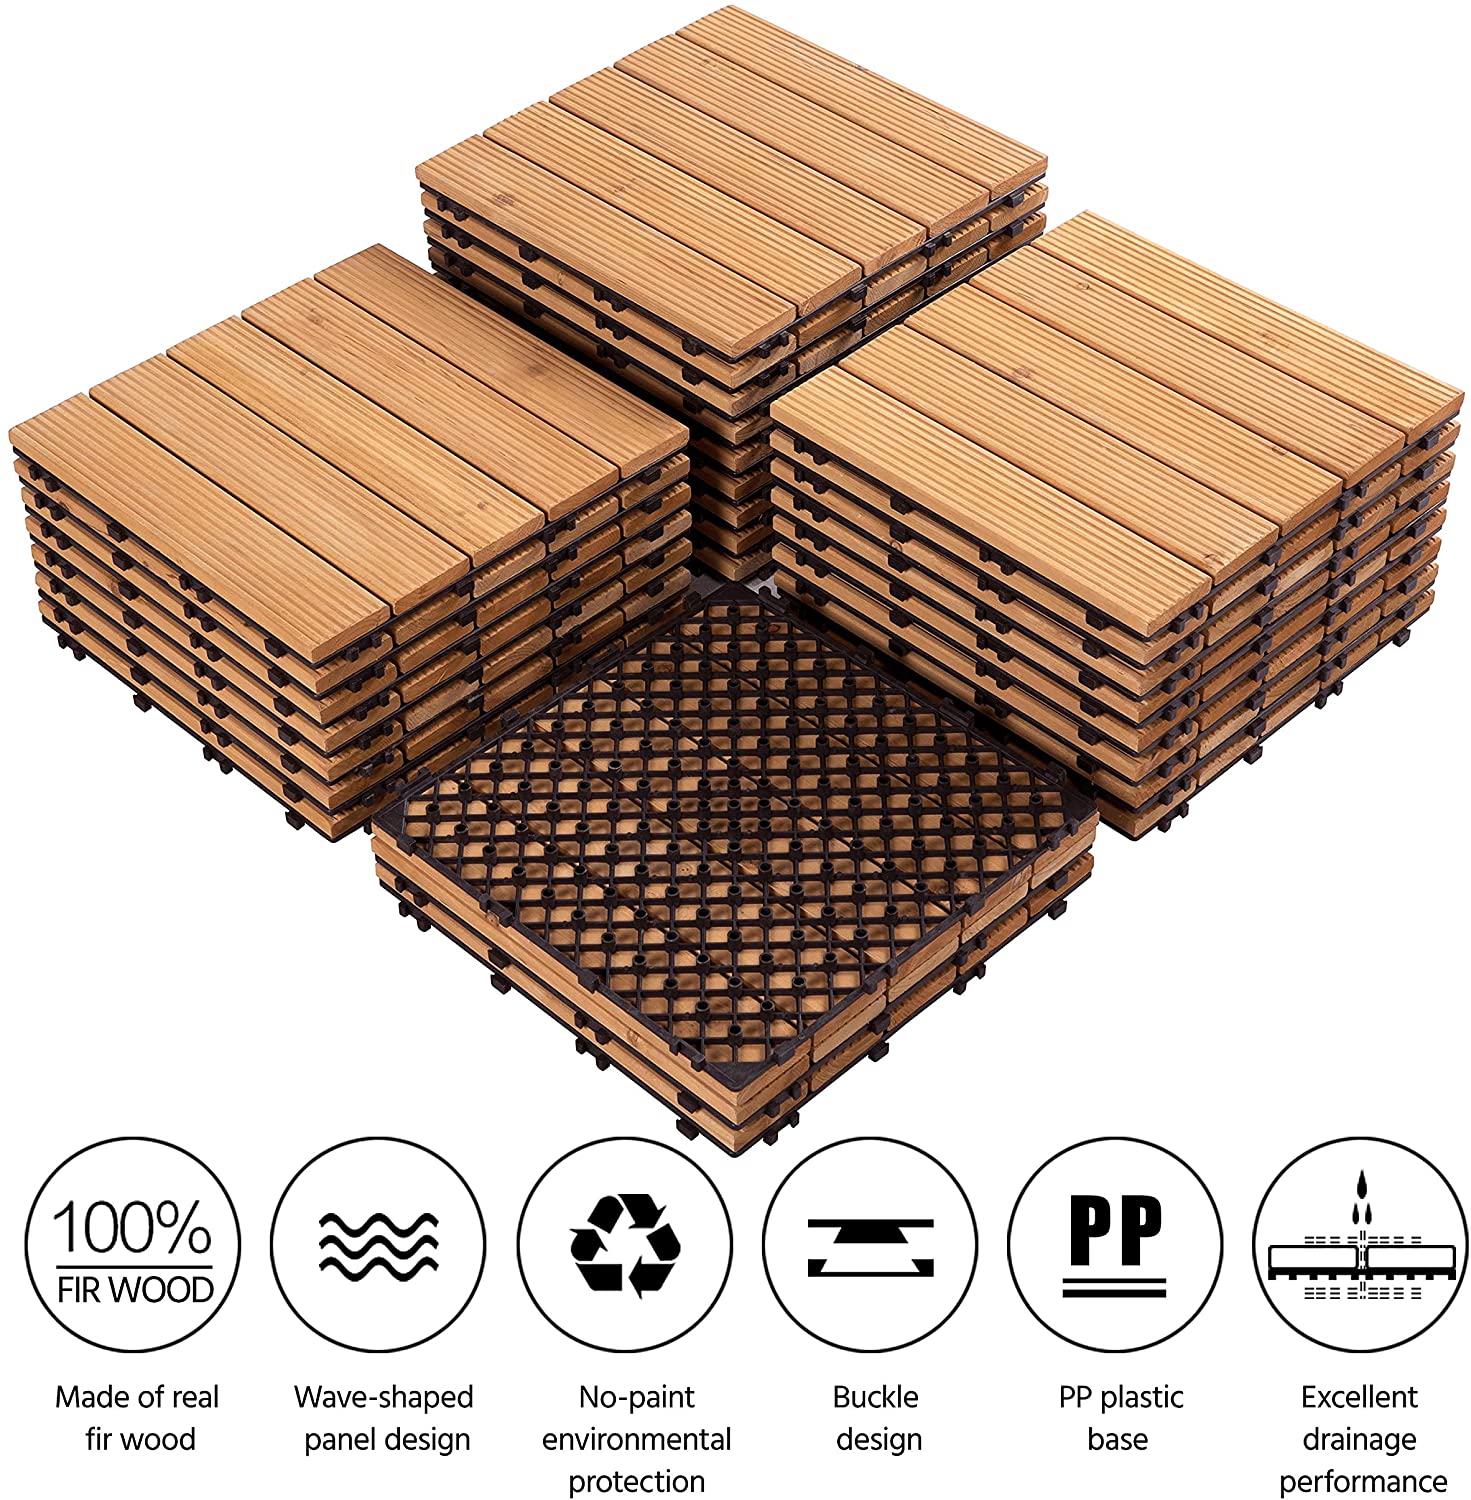 UltraShield Naturale 1 ft. x 1 ft. Quick Deck Outdoor Composite Deck Tile in Brown (27 sq. ft. per Box)